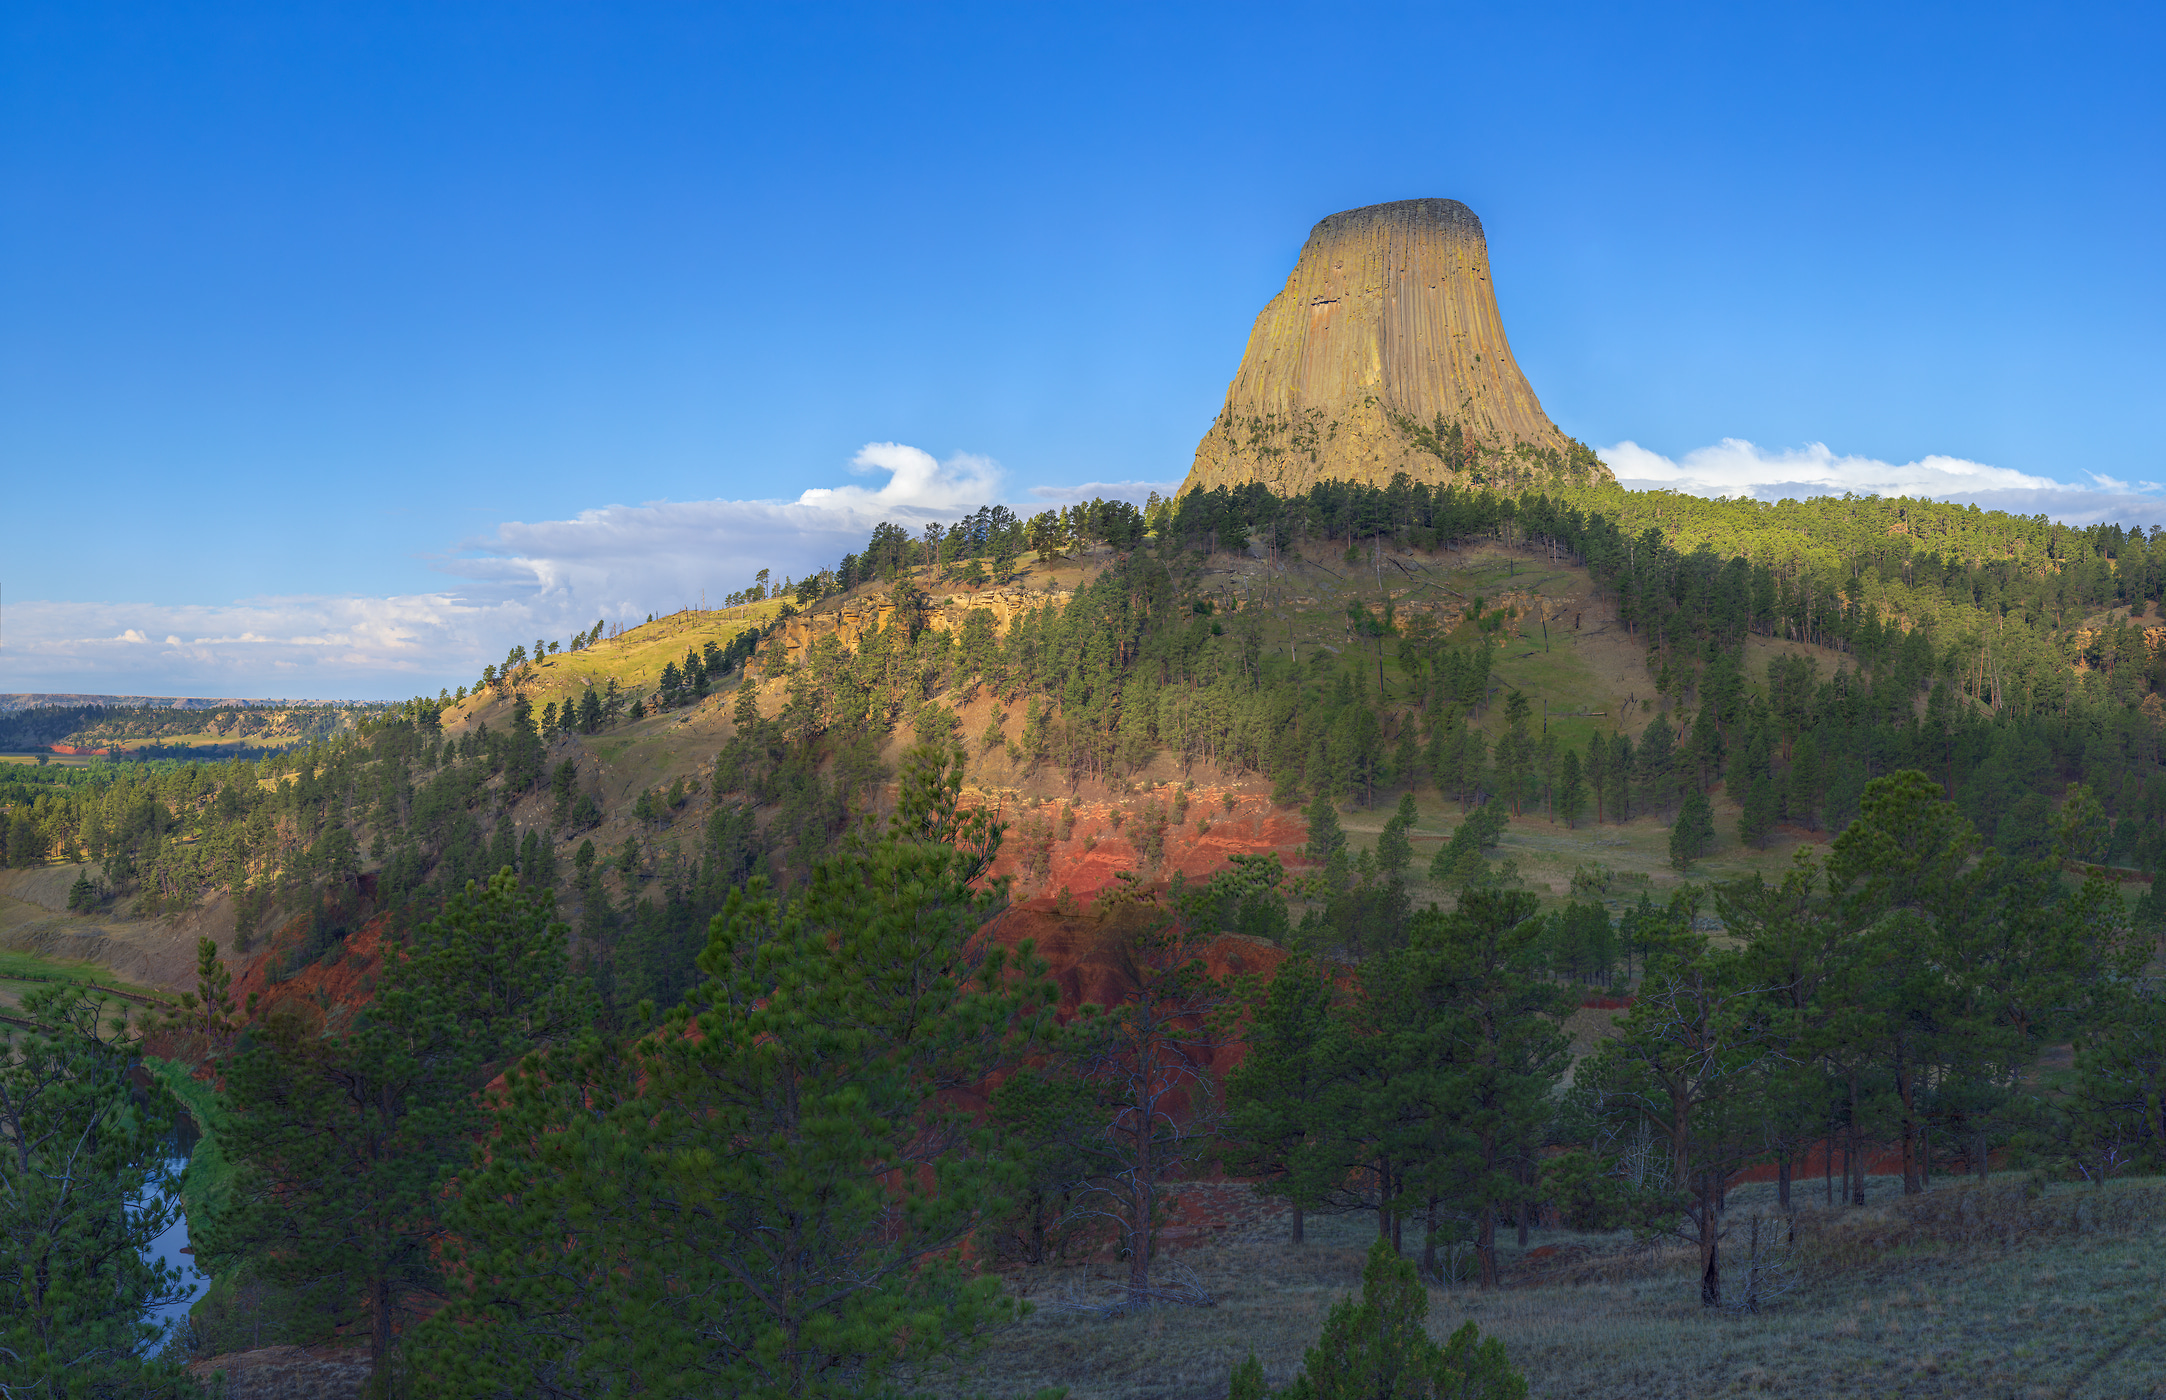 821 megapixels! A very high resolution, large-format VAST photo print of a Wyoming landscape including Devils Tower; photograph created by John Freeman in Devils Tower National Monument, Wyoming